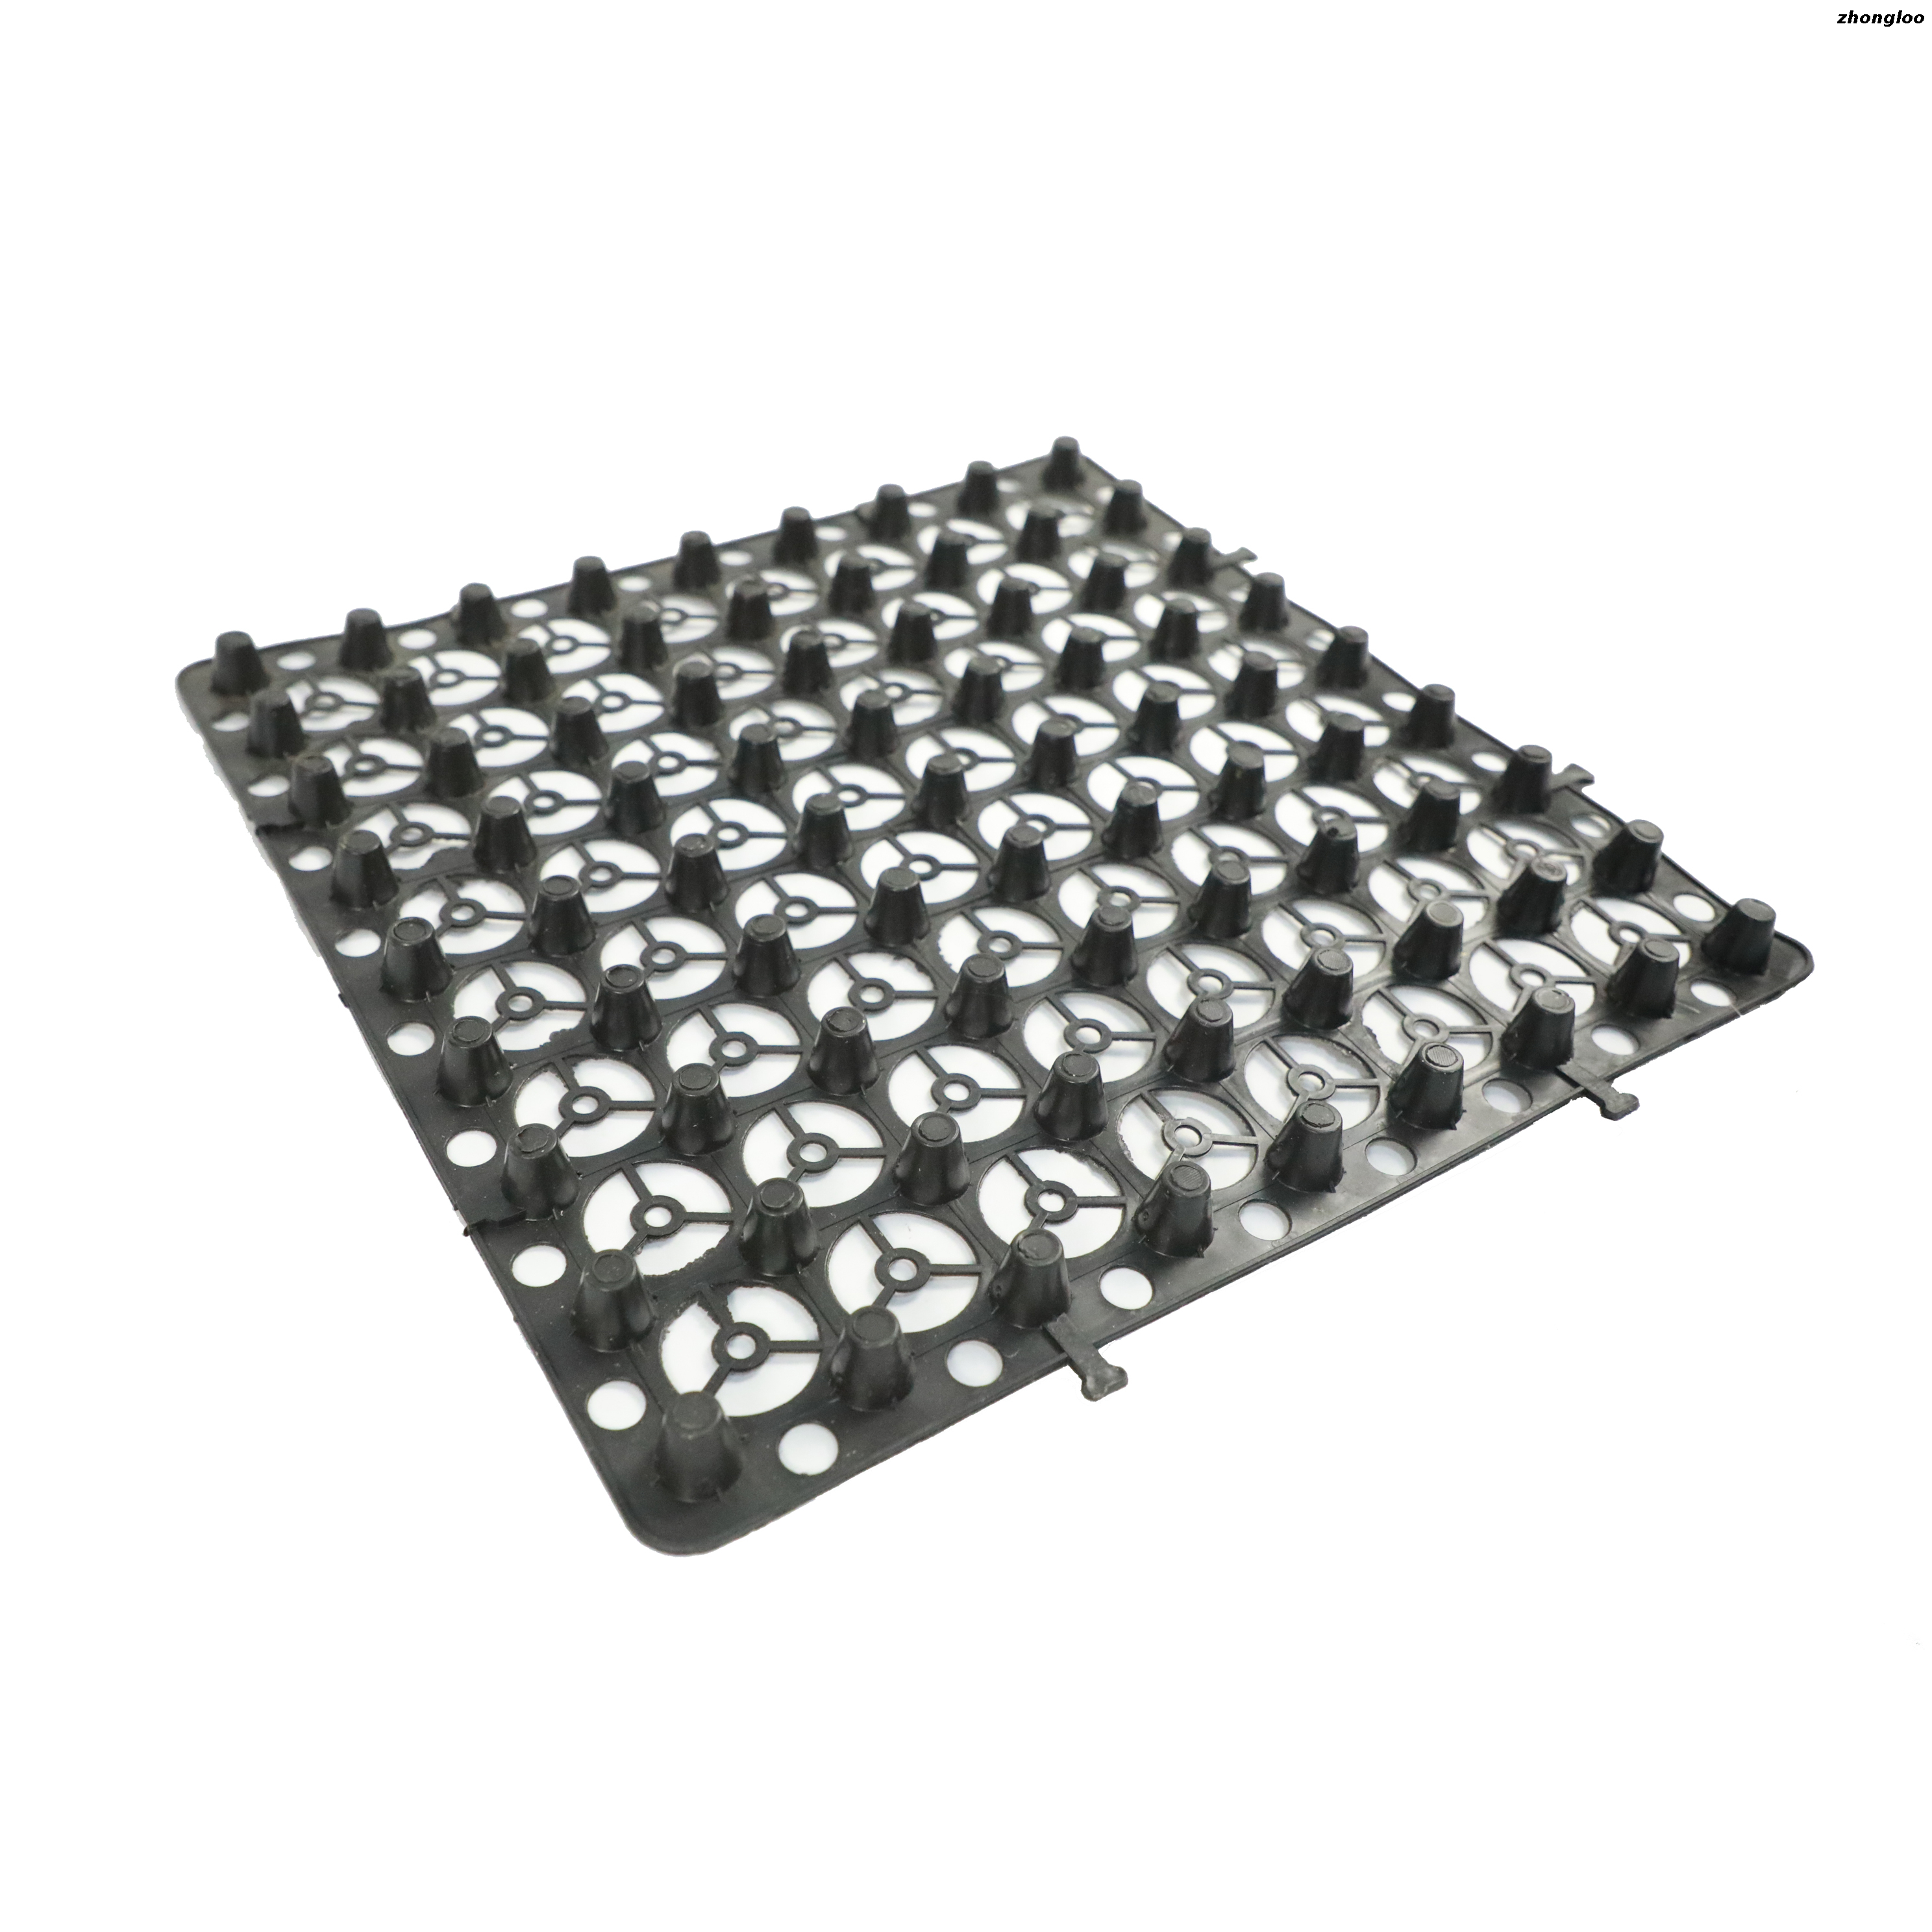 HDPE PP Water Storage Drainage Board Widely Used in Sports Direct Deal 50*50cm Black White Green